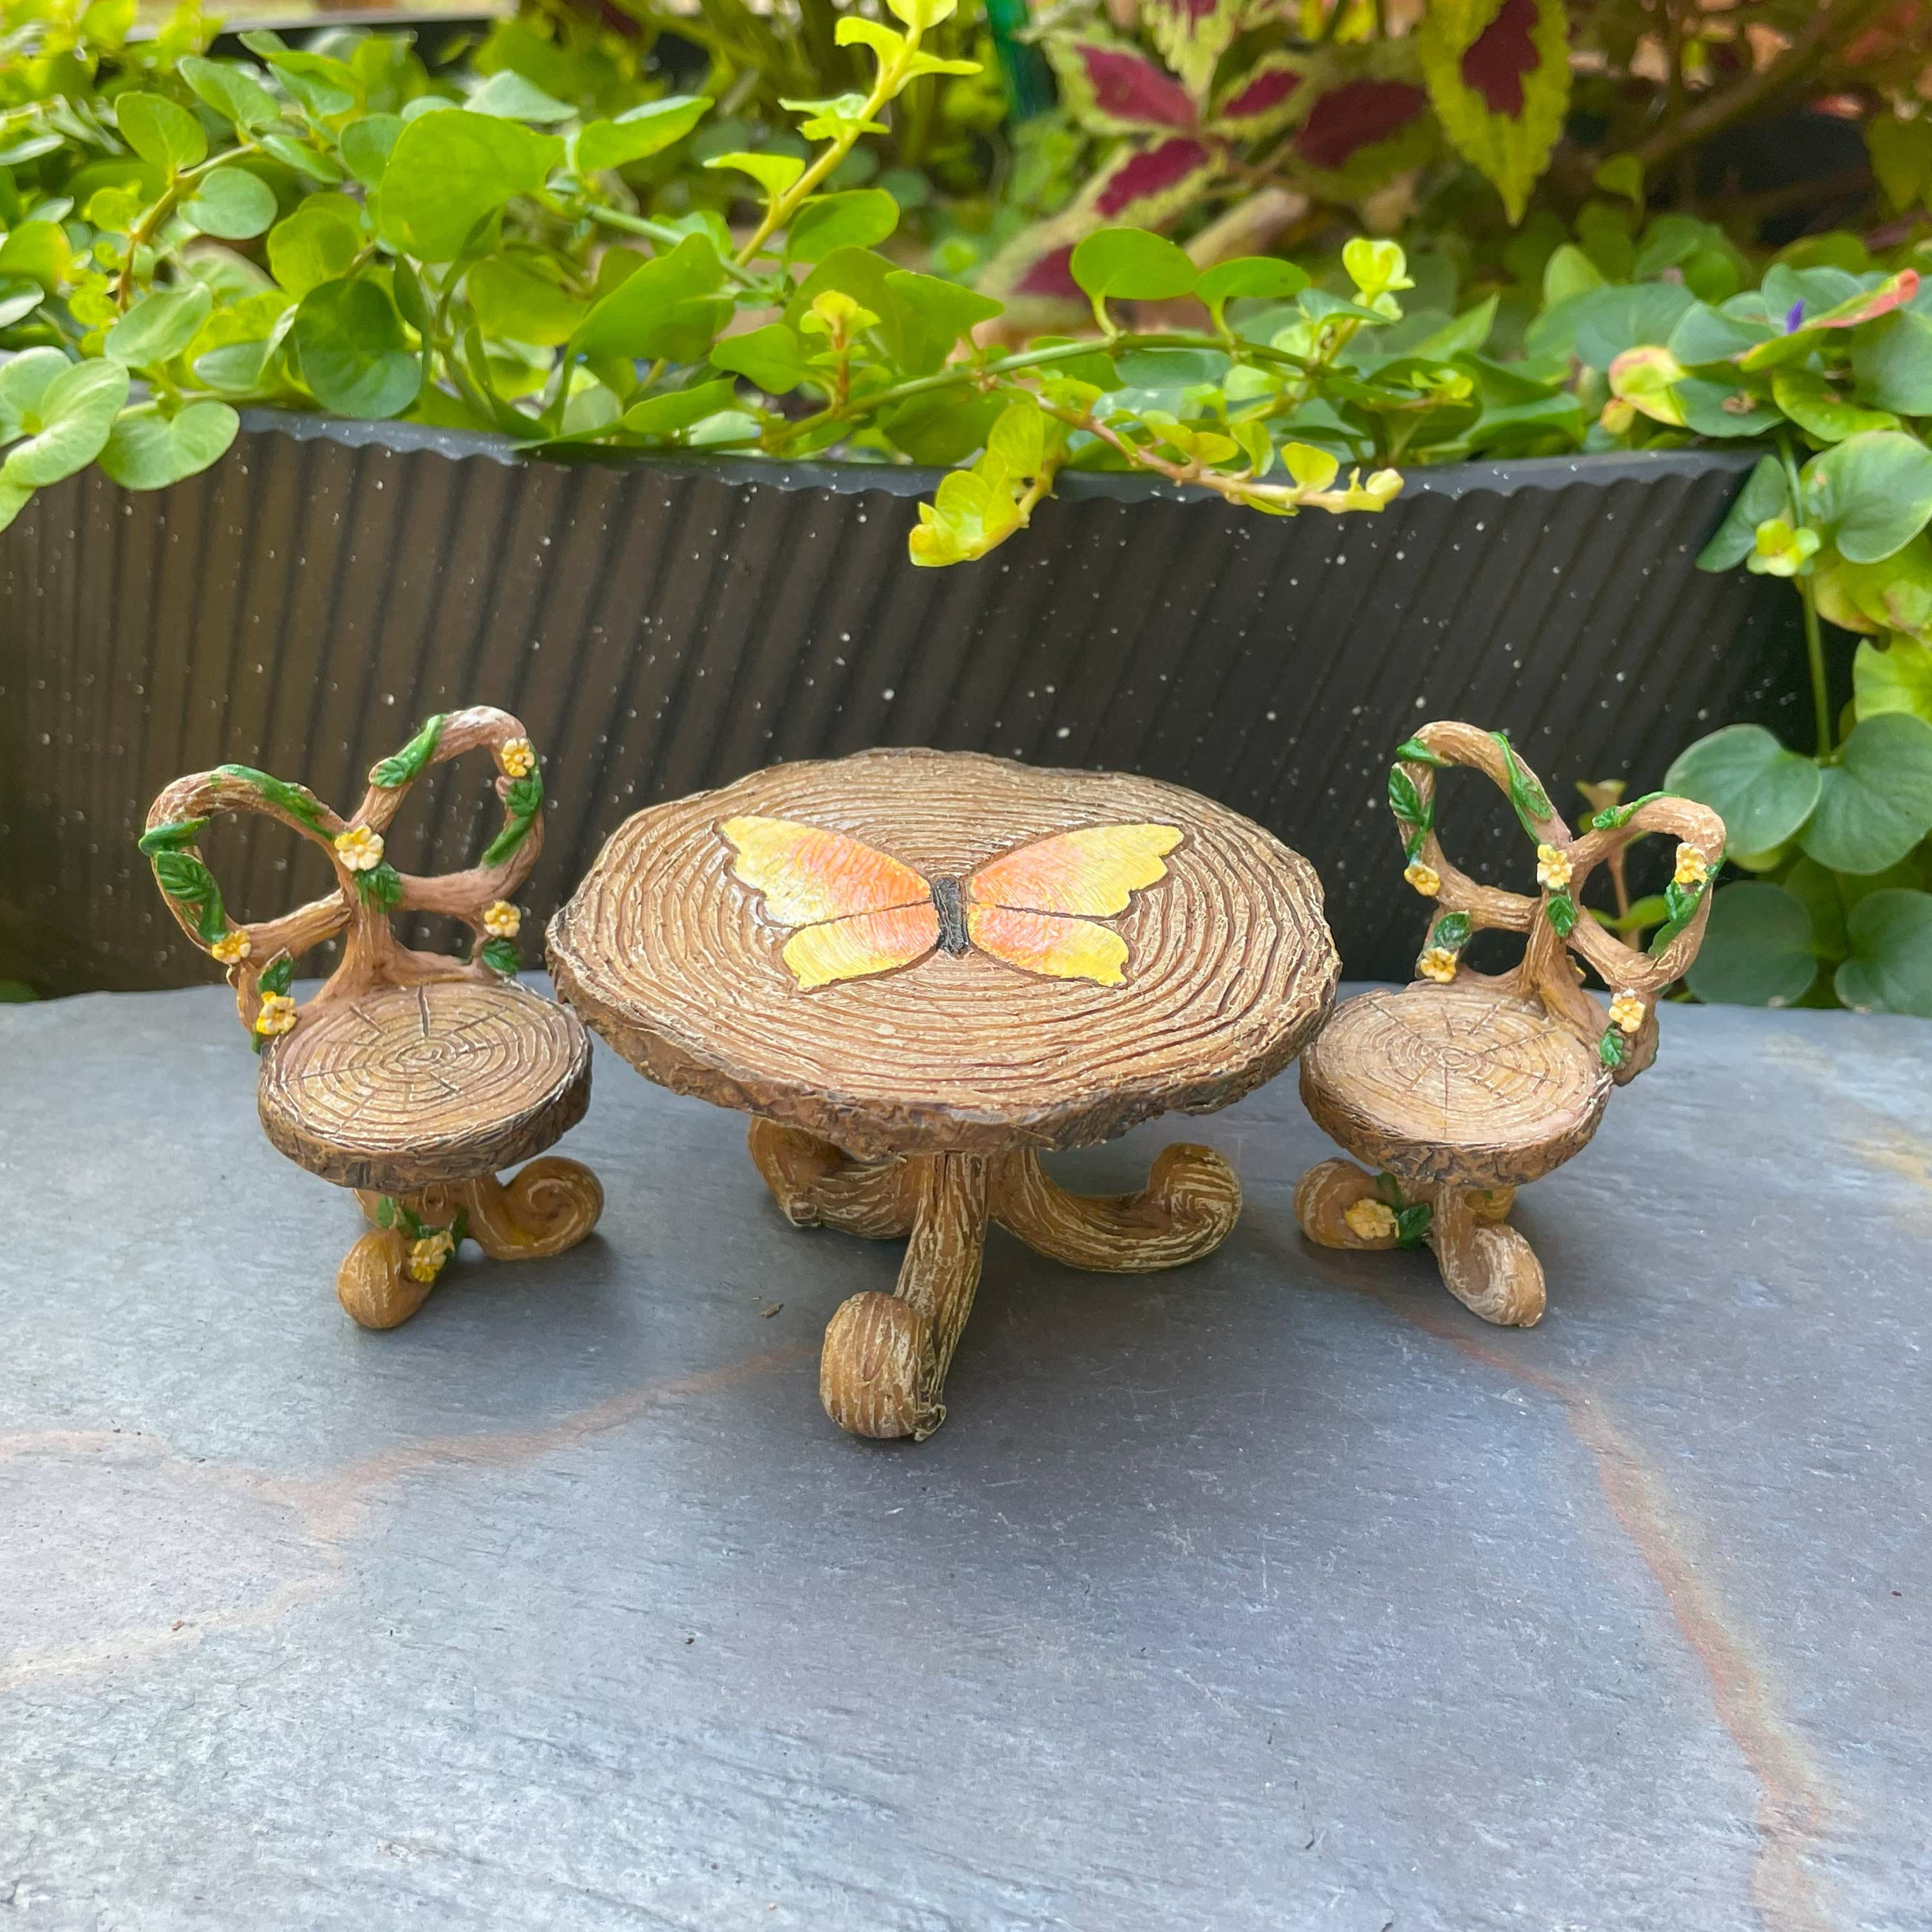 A Set of 5pcs Fairy Garden Accessories Miniature Chairs, Table and